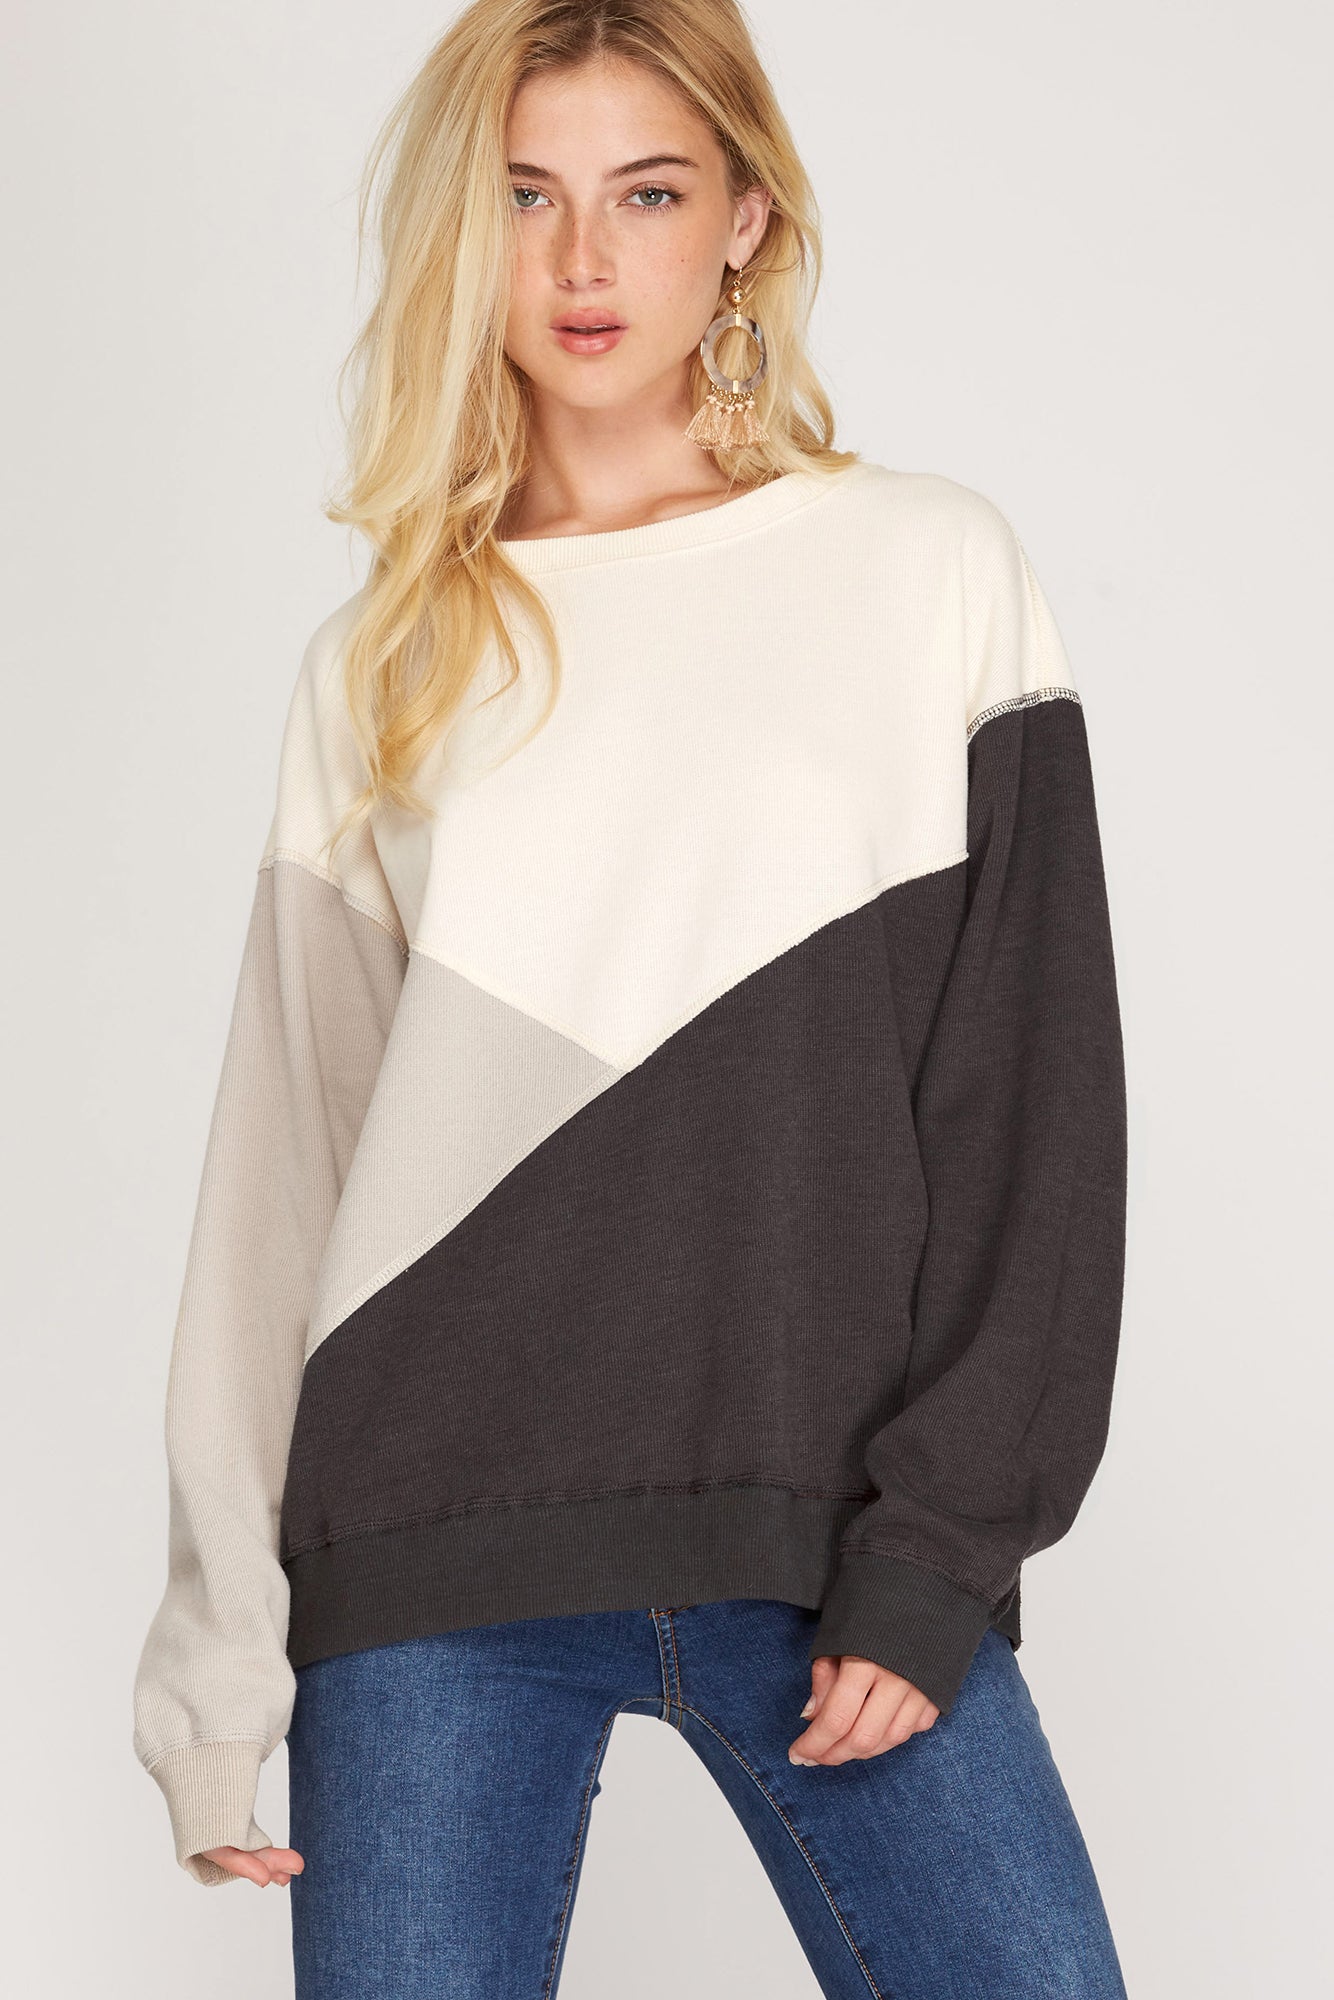 Long Sleeve Color Block Pullover